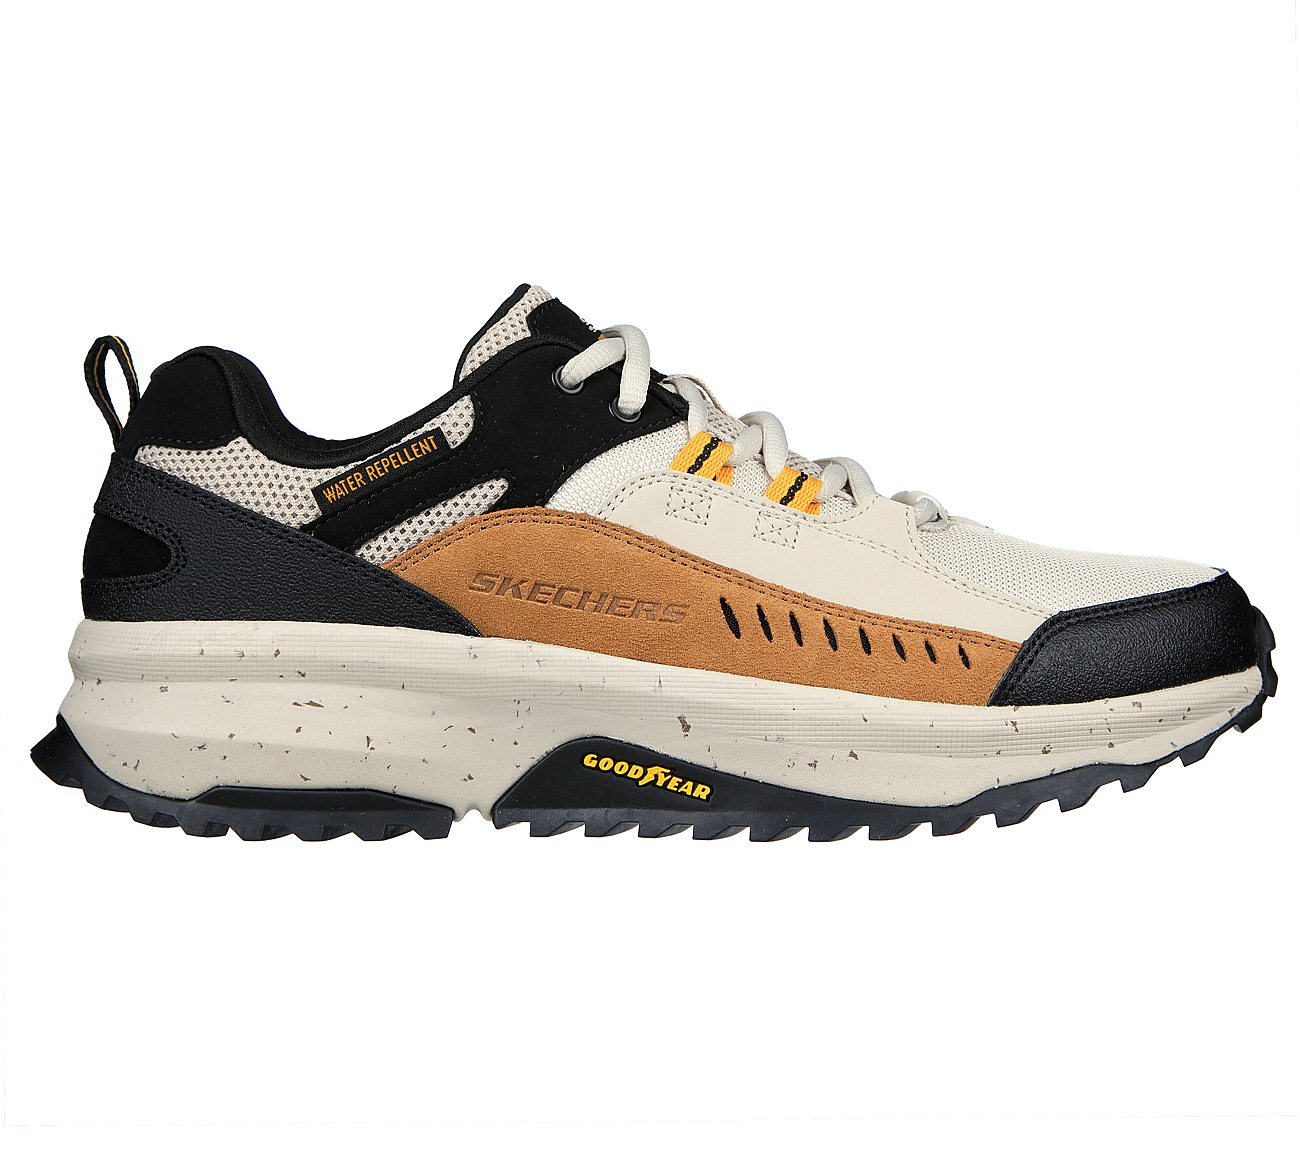 SKECHERS BIONIC TRAIL - ROAD, TAUPE/BLACK Footwear Right View